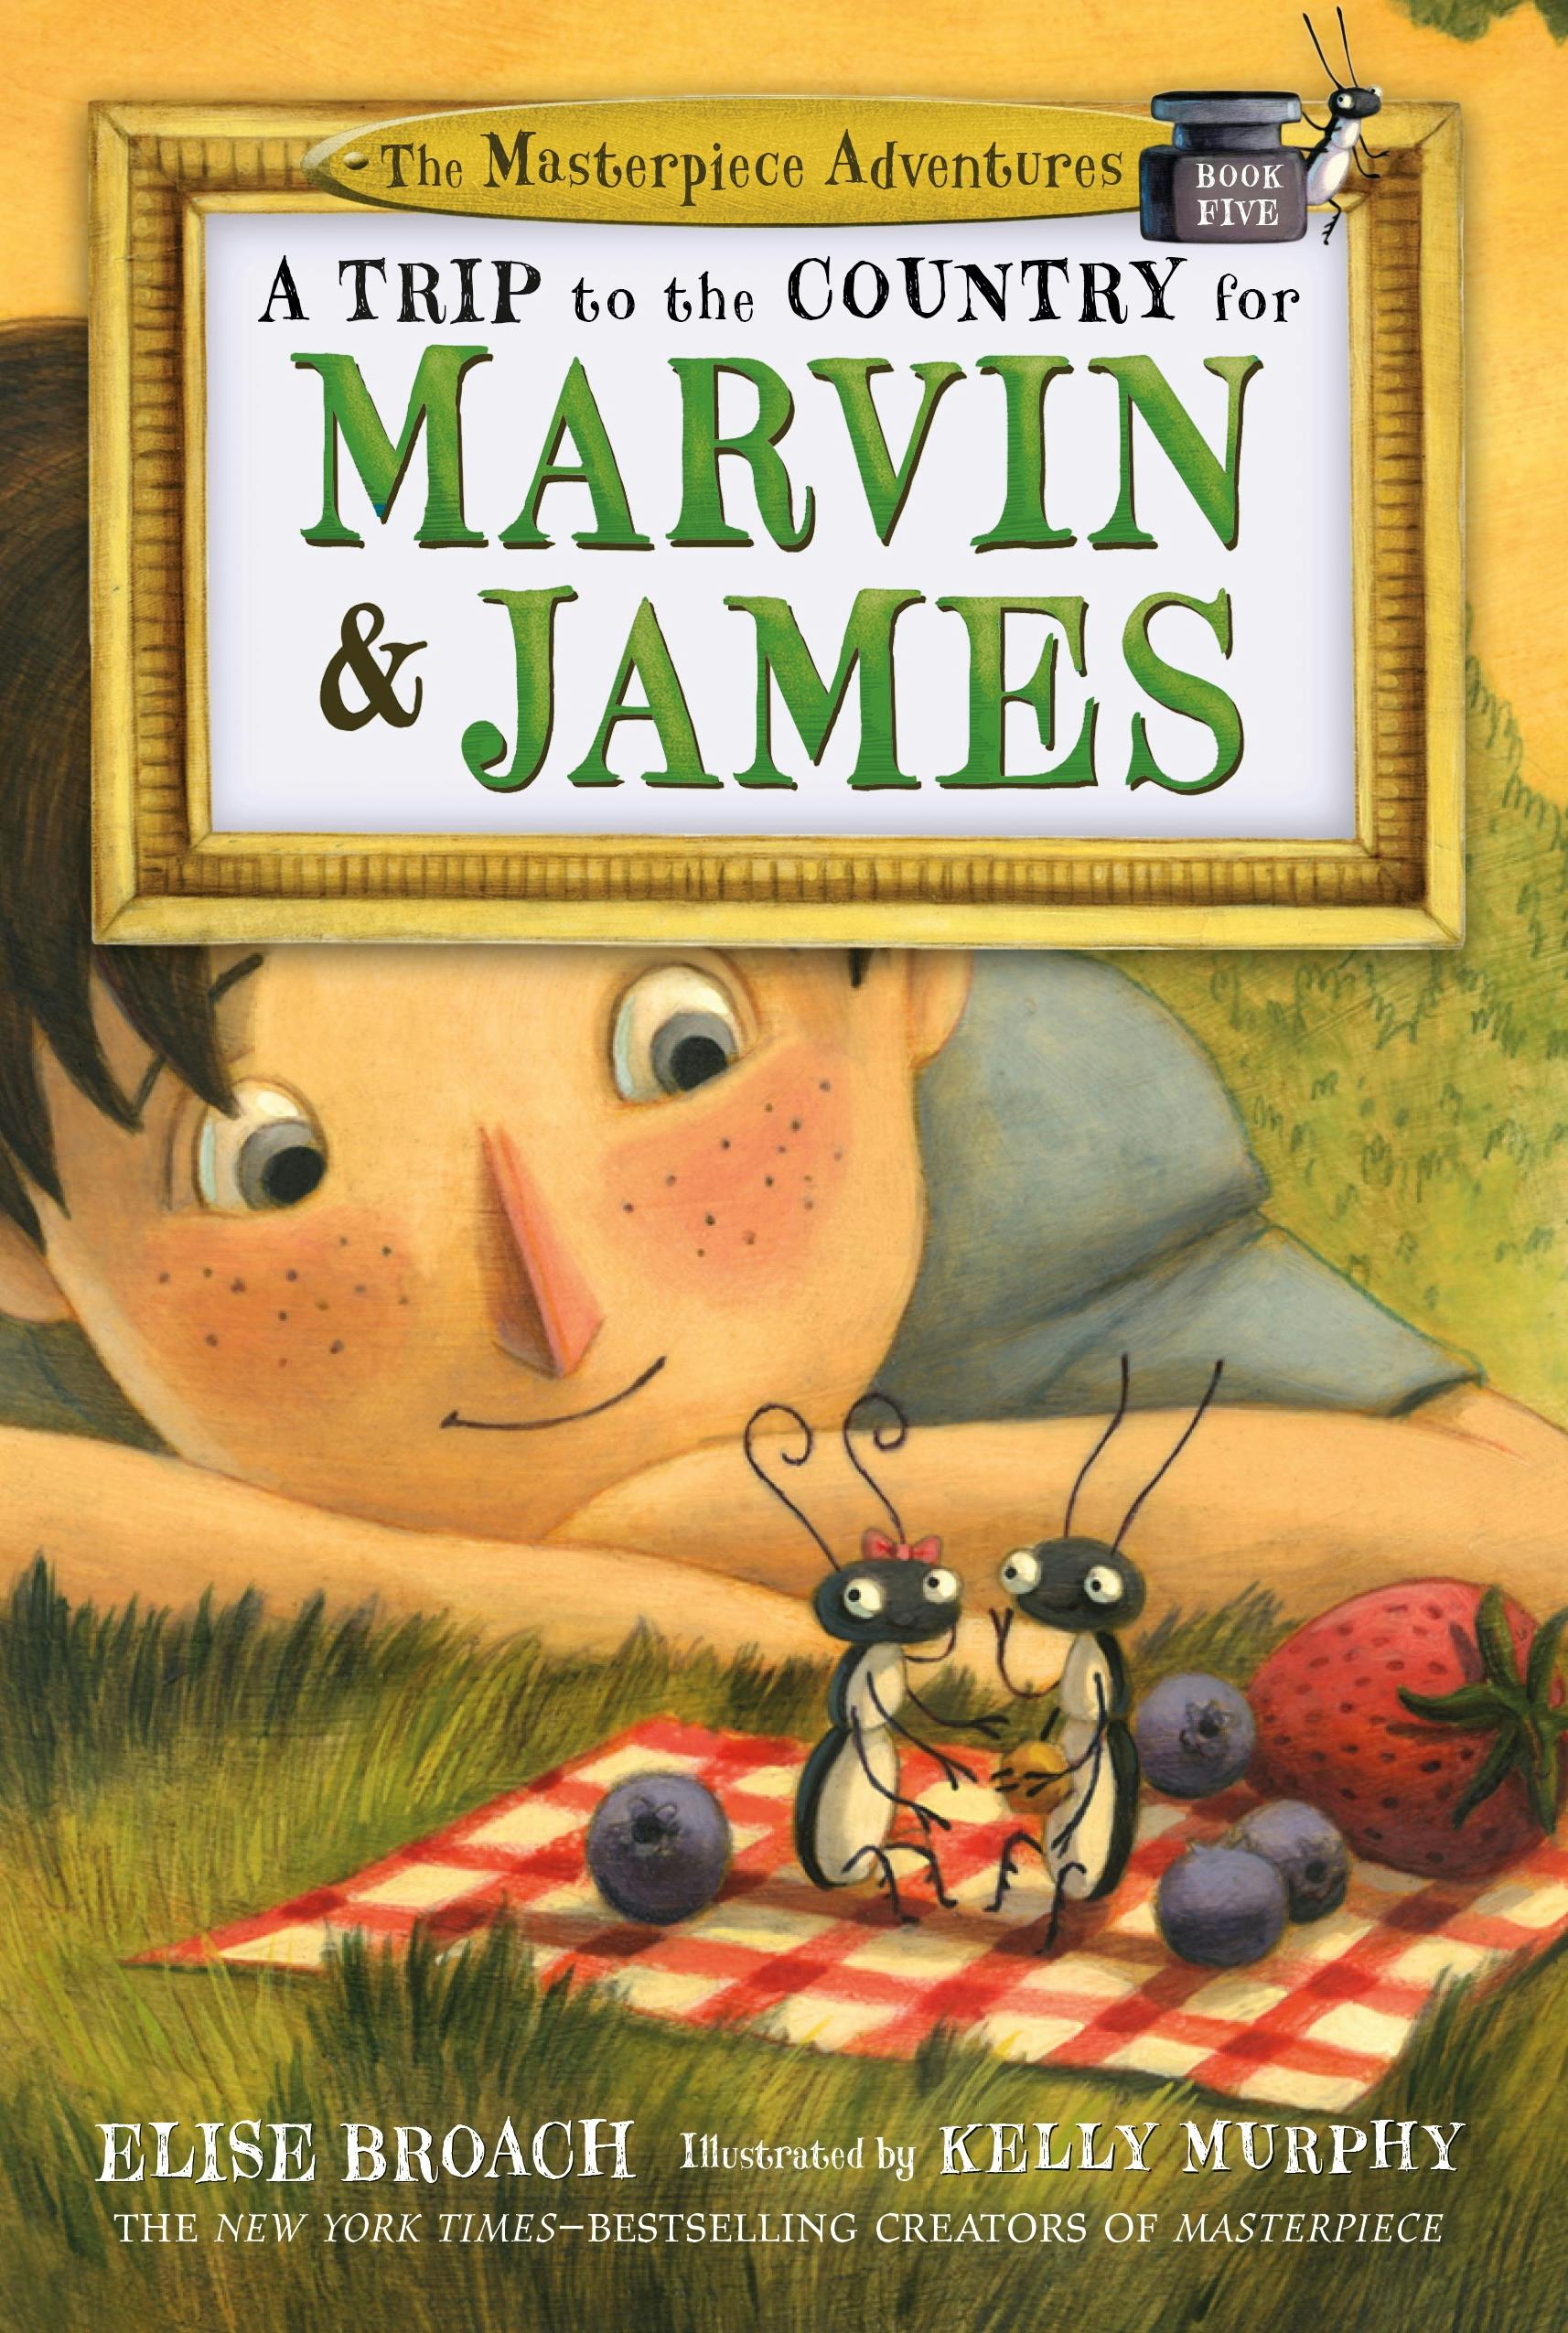 Image of A Trip to the Country for Marvin & James